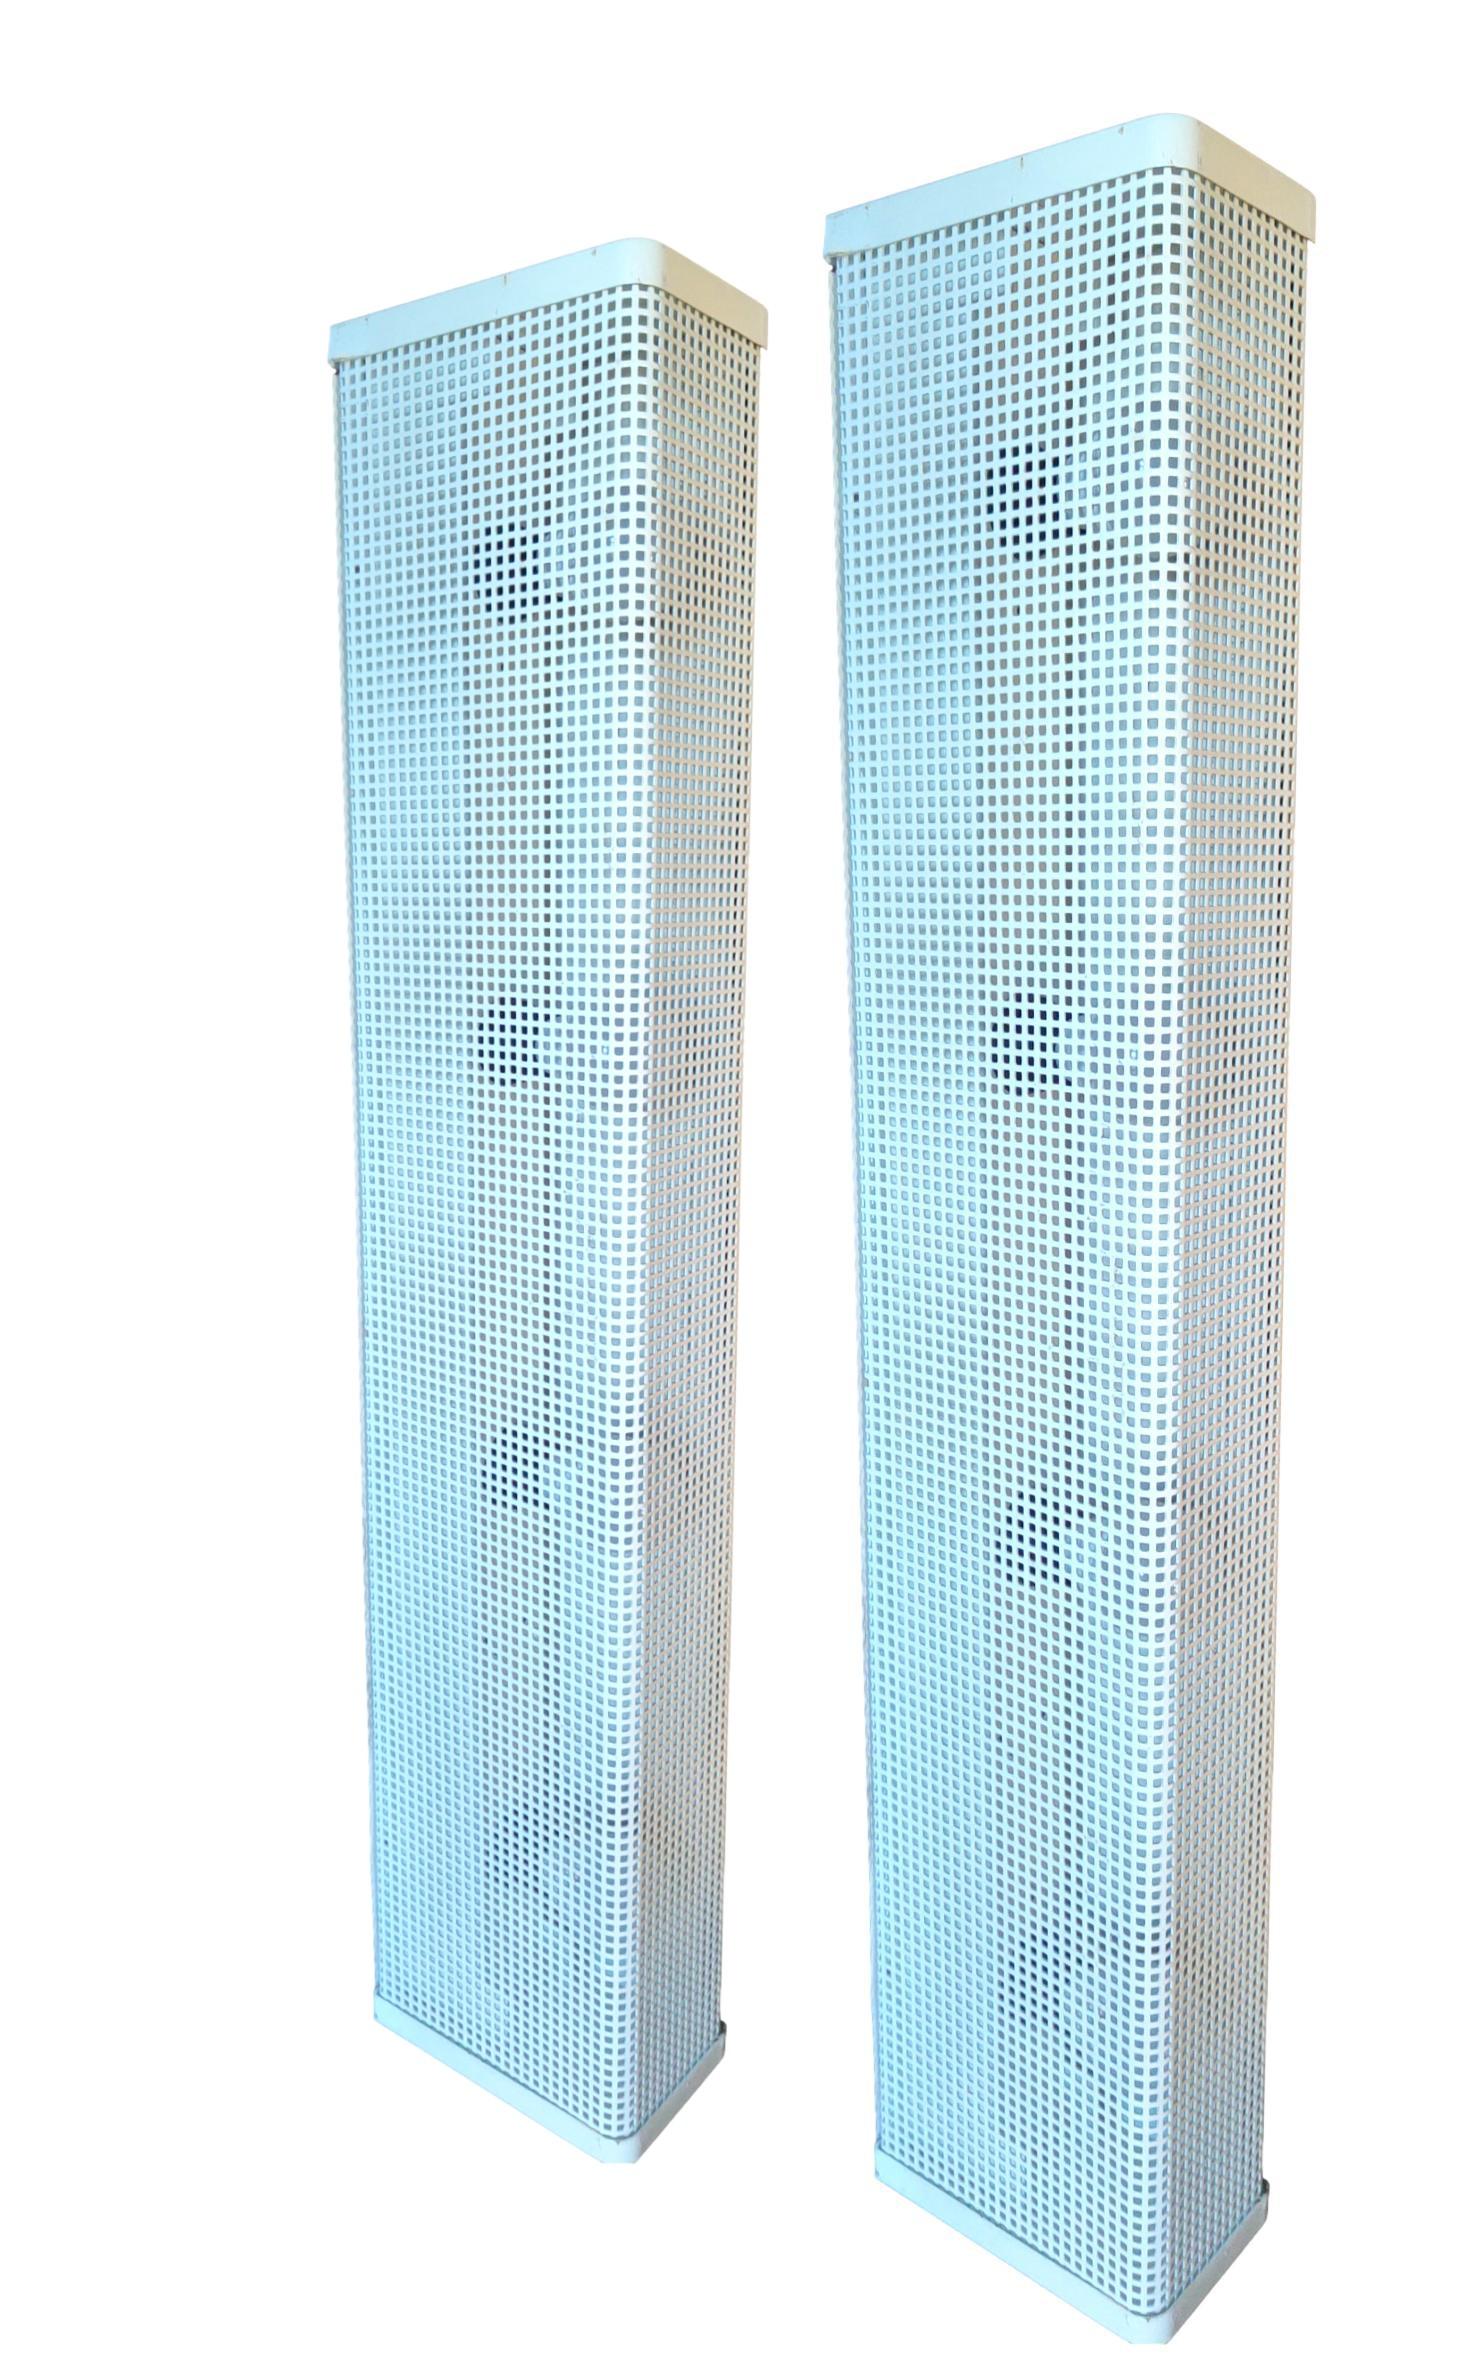 rare pair of  original lamps from the 1970s, probable design by josef hoffmann, made of white/beige perforated sheet metal, equipped with 4 e14 socket lamp holders, to be placed either vertically or horizontally.
They measure 70 cm long, 13 cm wide